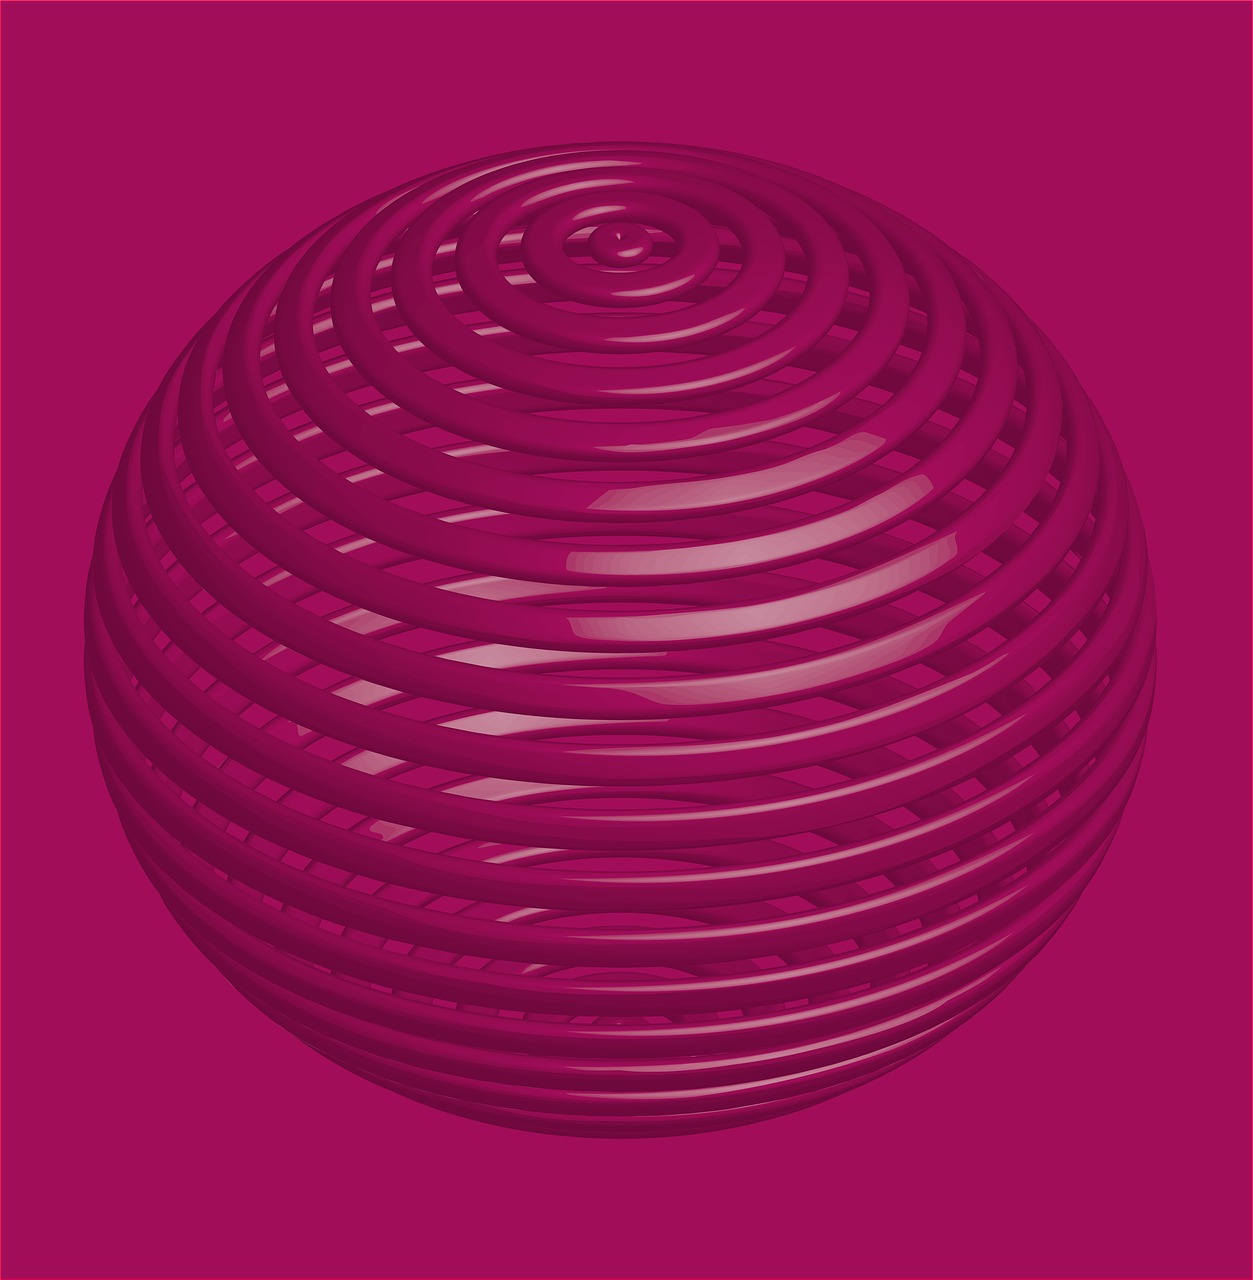 sphere 3d background free photo